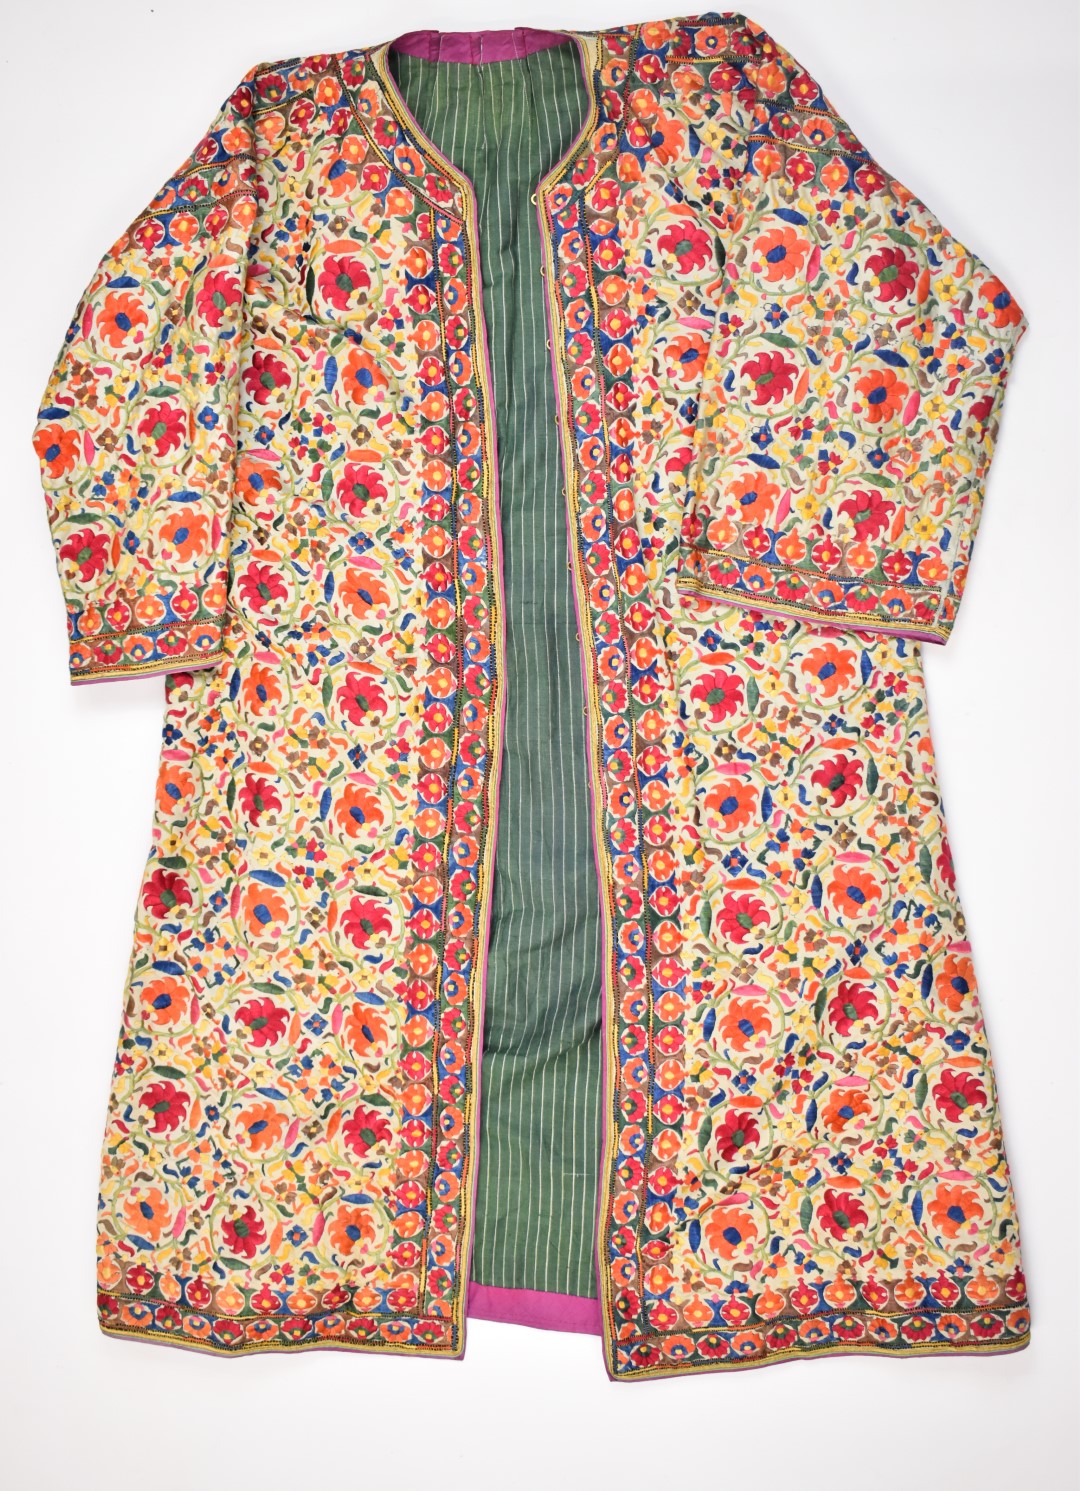 19th / 20thC Indian embroidered coat or coat dress, with a note stating the coat was gifted in the